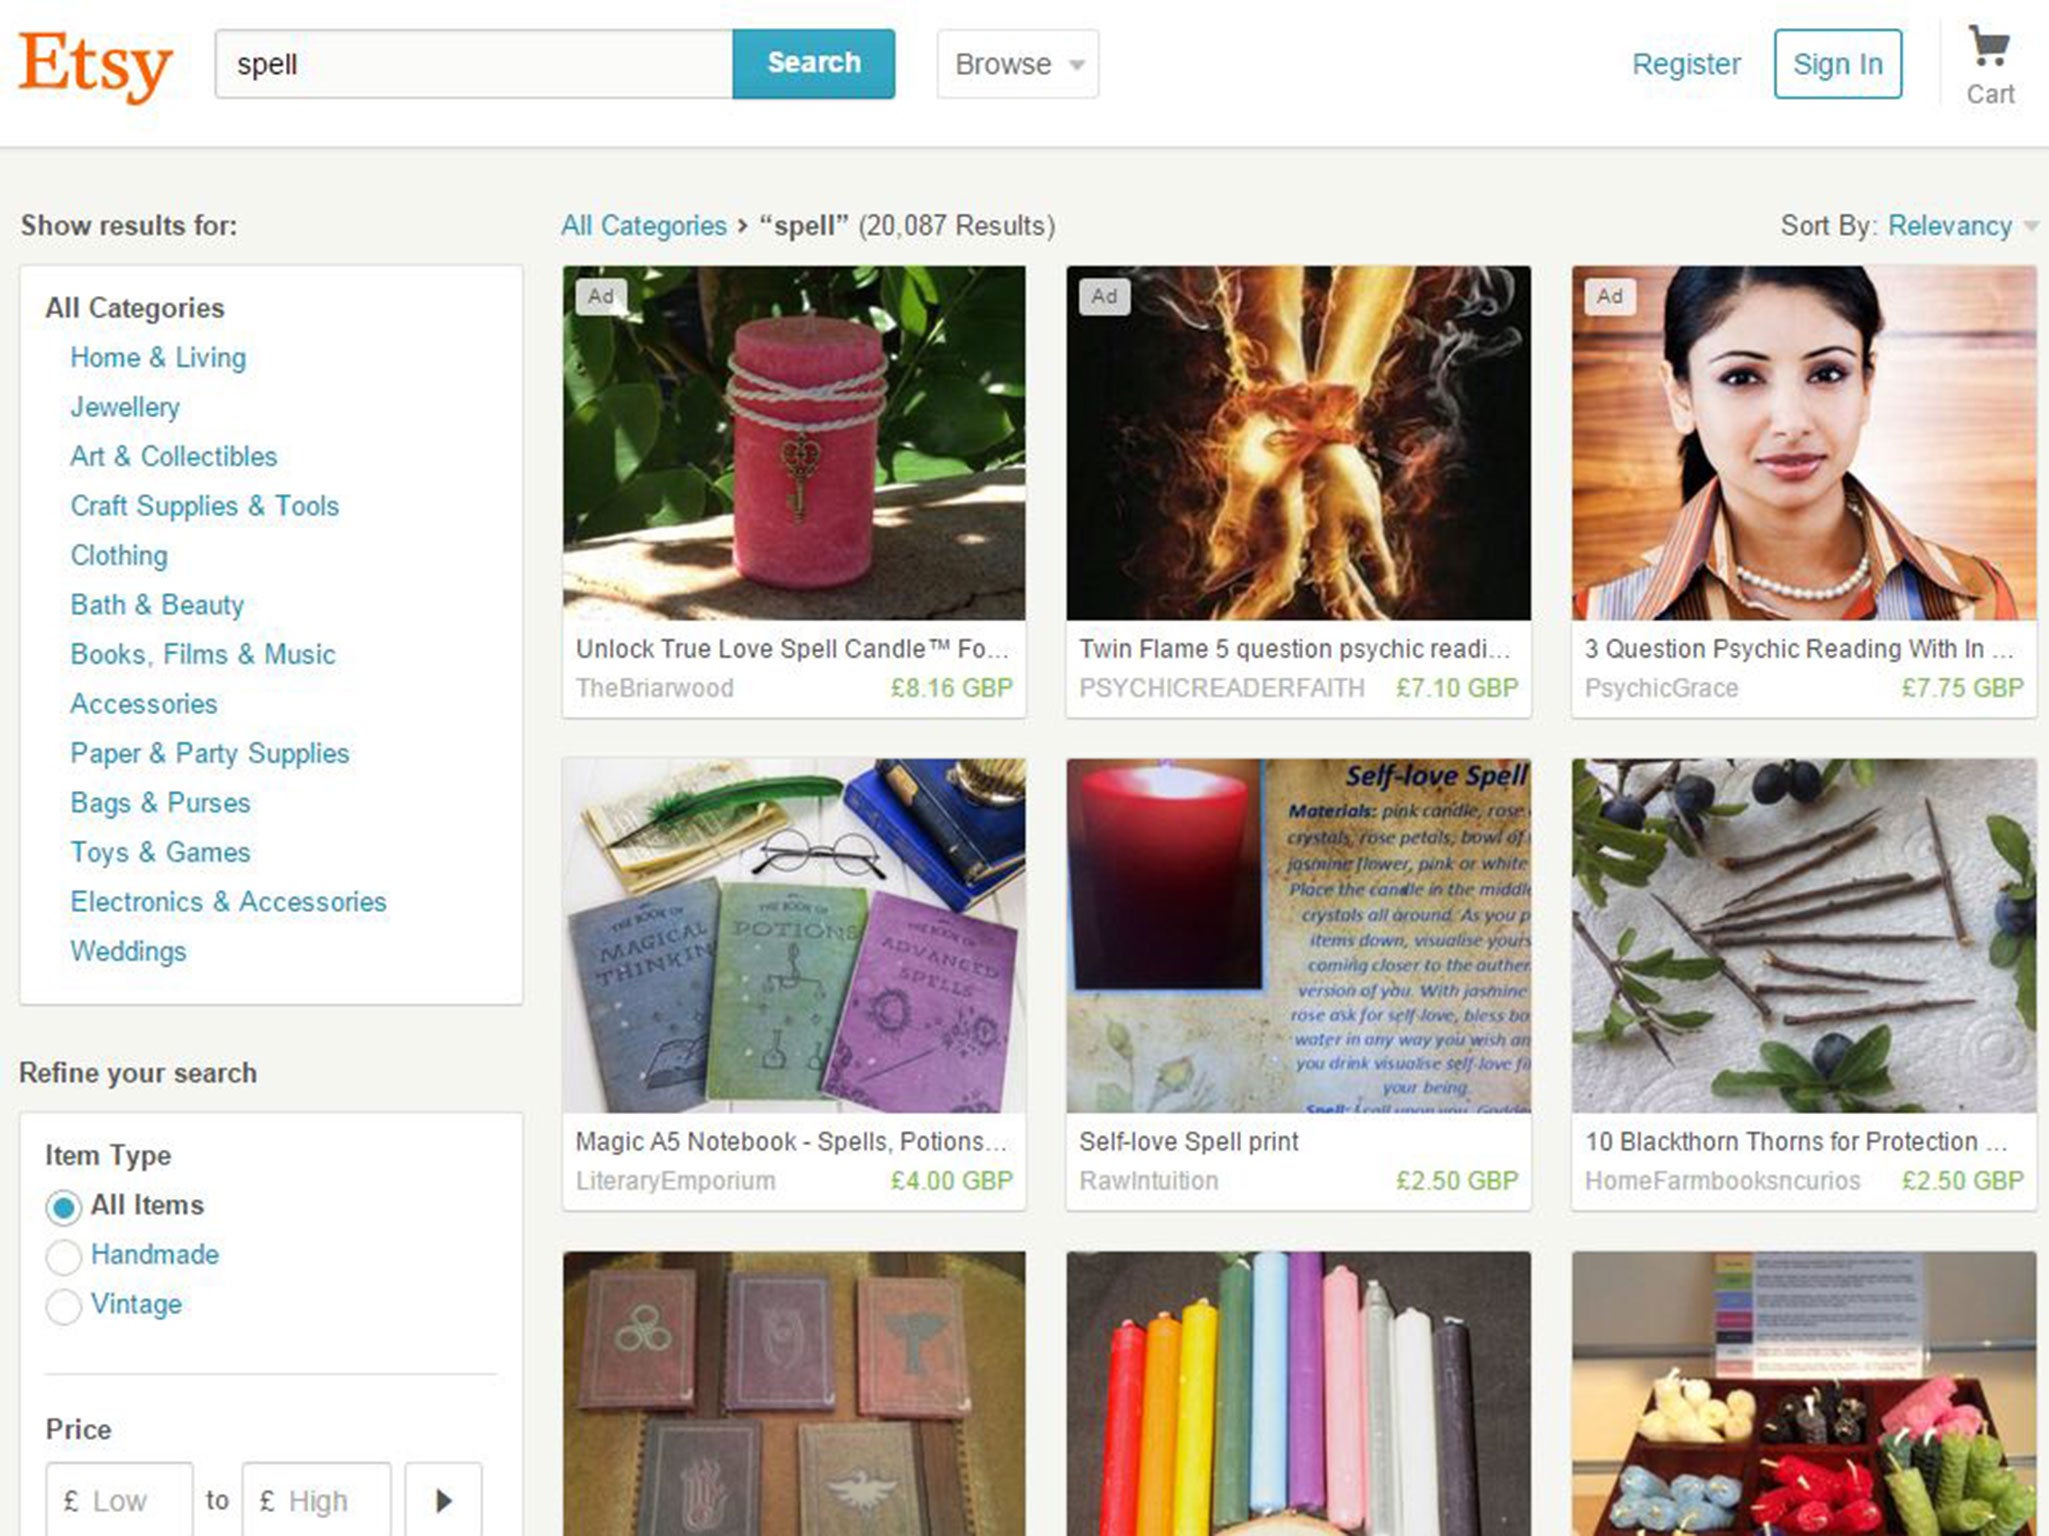 Etsy became popular with supernatural sellers after eBay banned spells and other metaphysical products in 2012